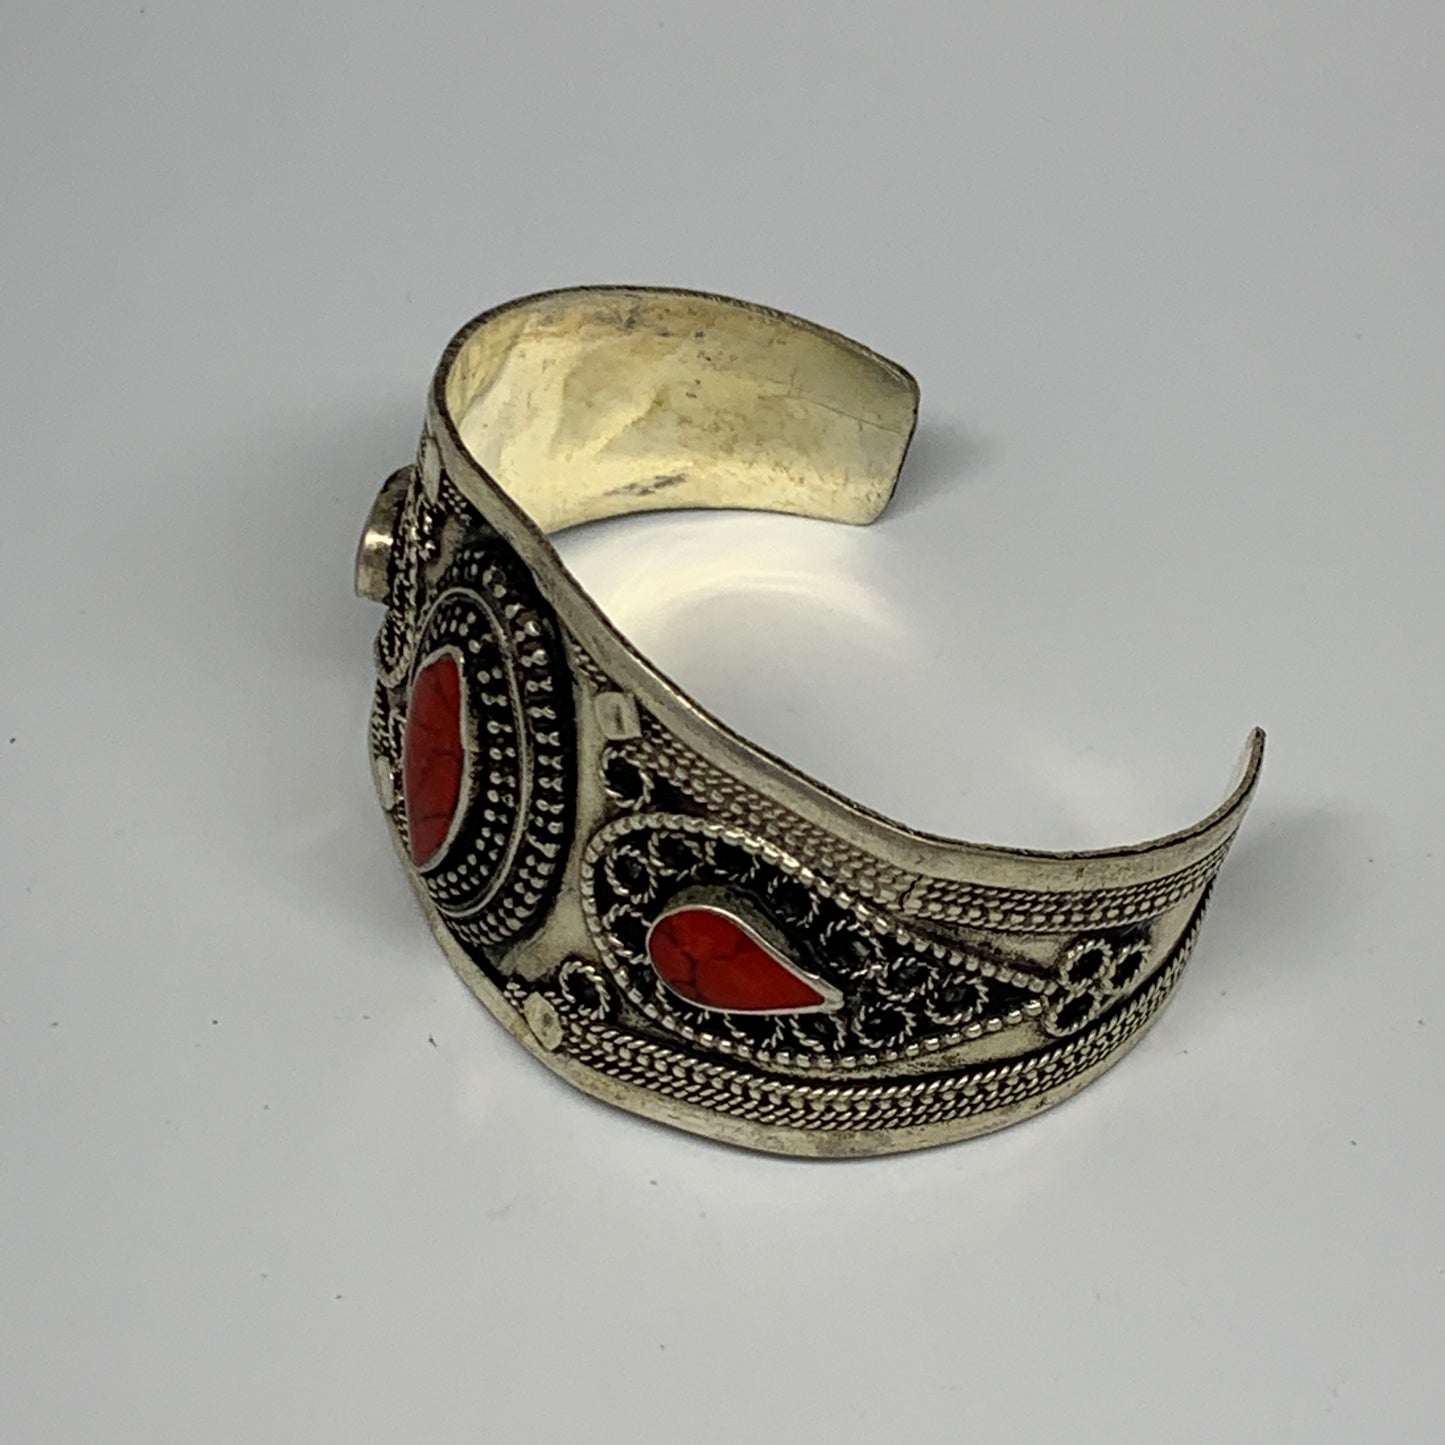 33.8g, 1.6" Turkmen Cuff Bracelet Tribal Small Marquise, Red Coral Inlay, B13500